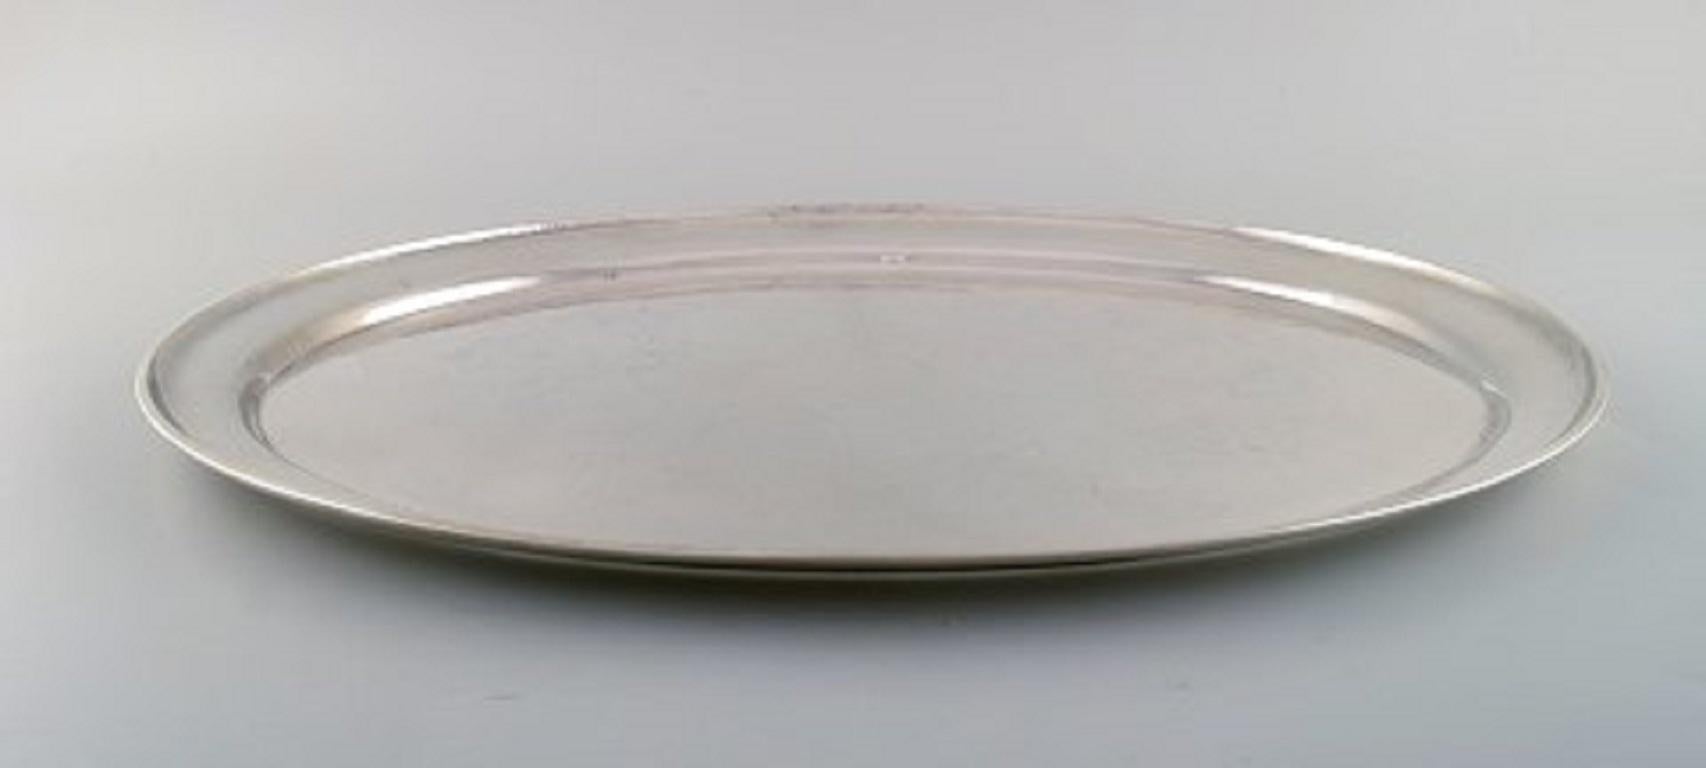 Large Georg Jensen serving tray in sterling silver.
Measures: 45 x 34.5 cm.
In very good condition.
Stamped.